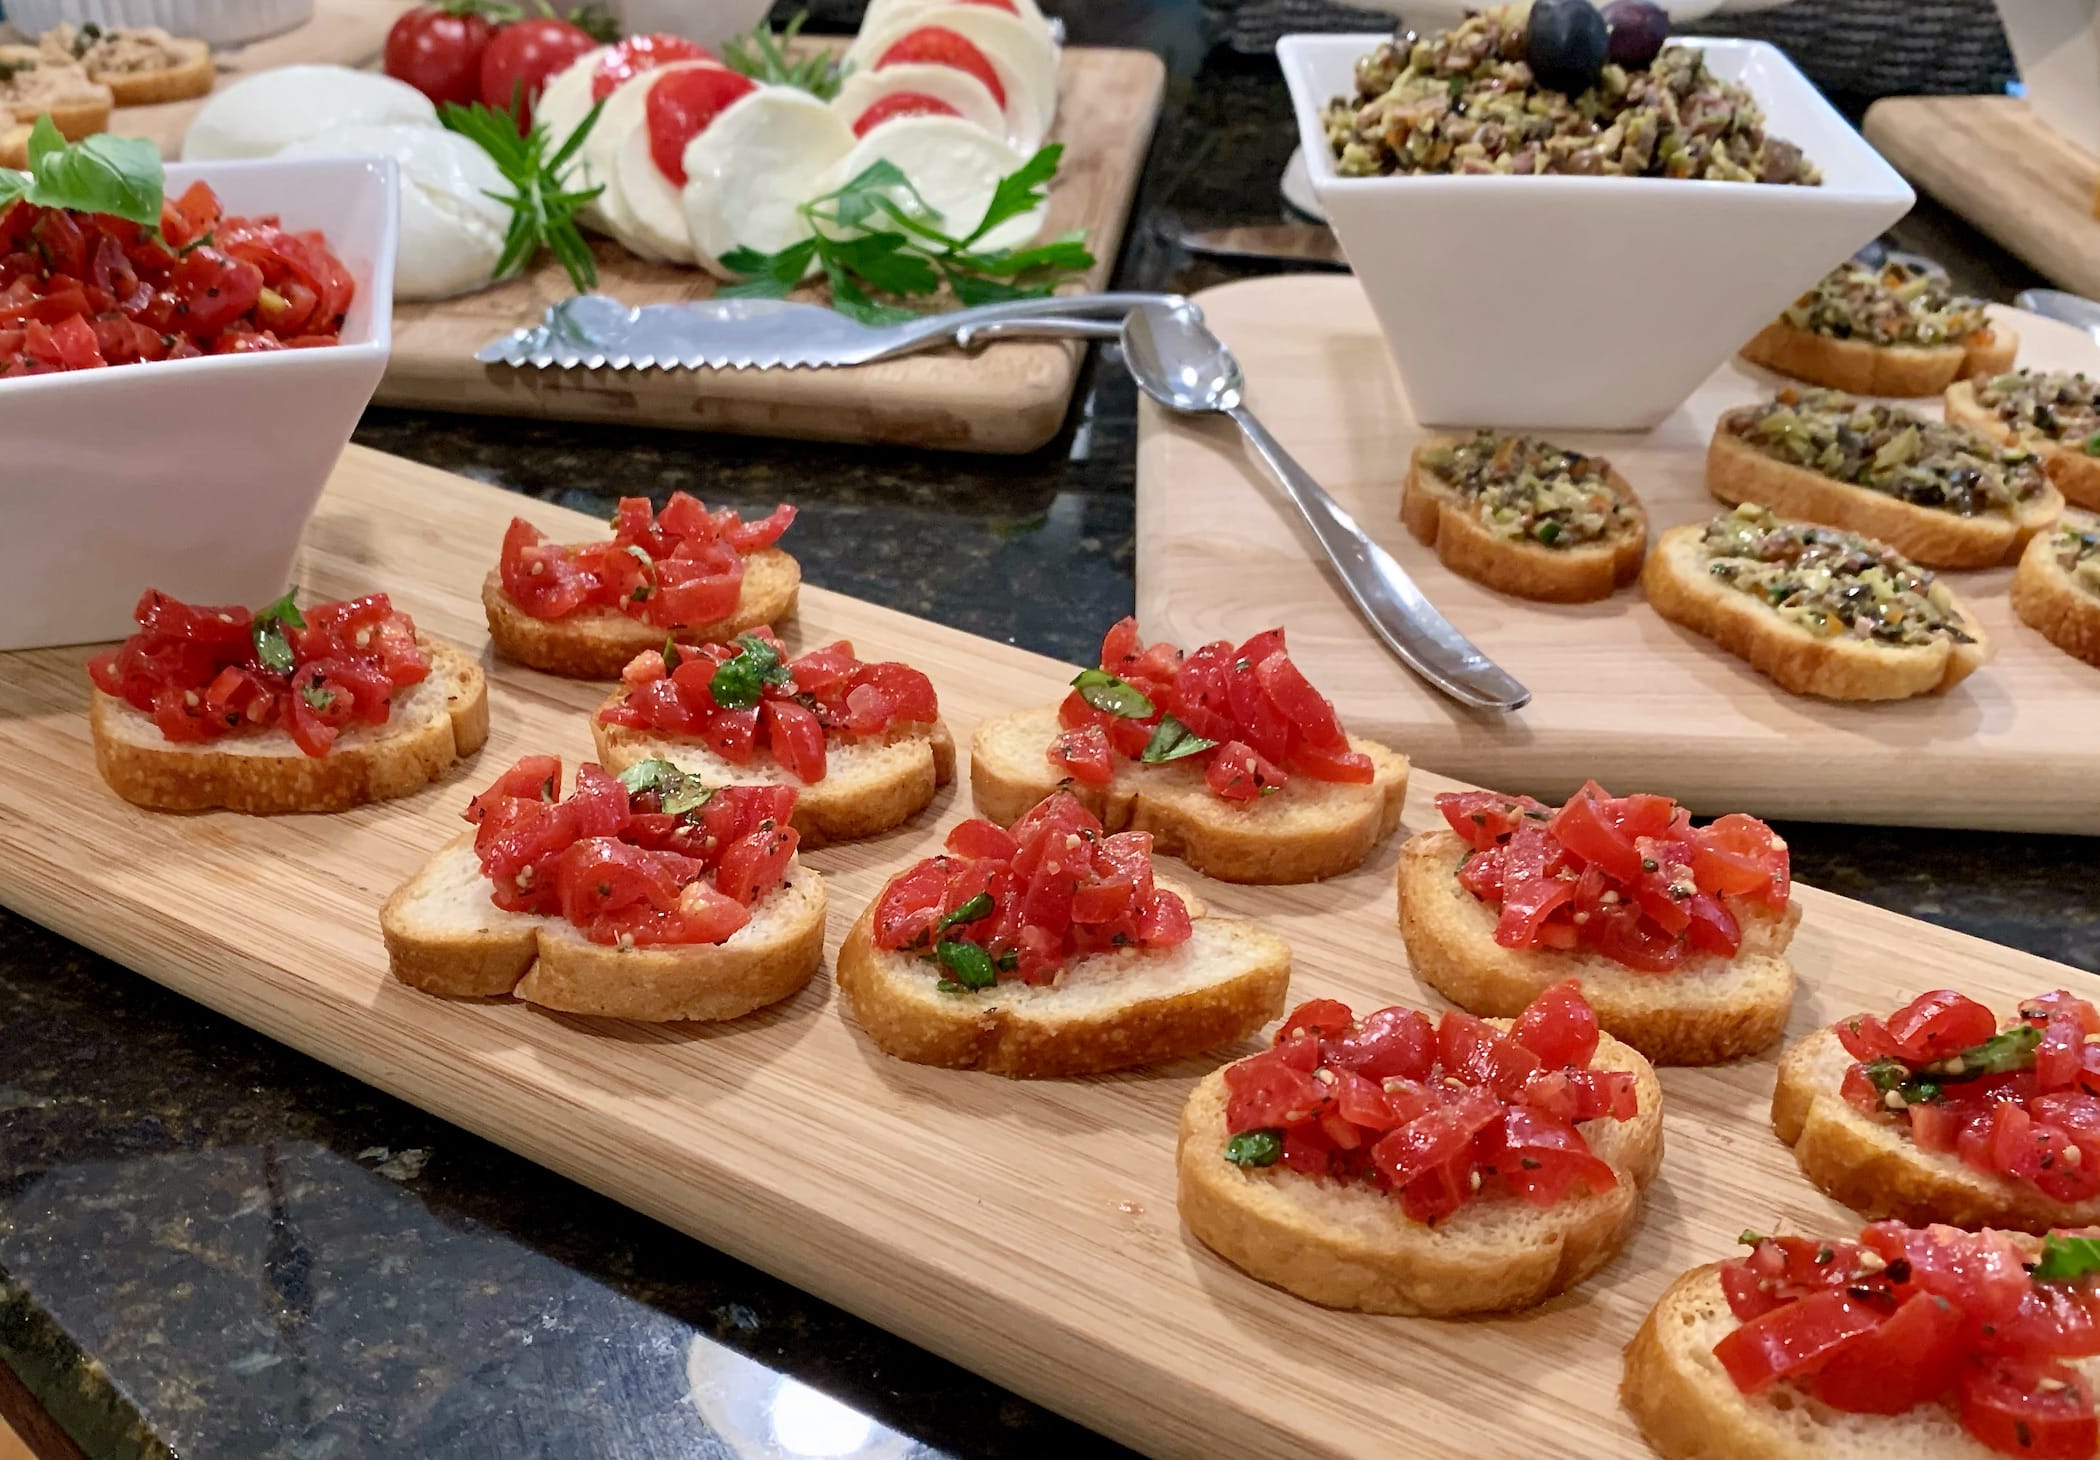 Tomatoes teamed with fresh basil and a balsamic reduction. served on crostini.